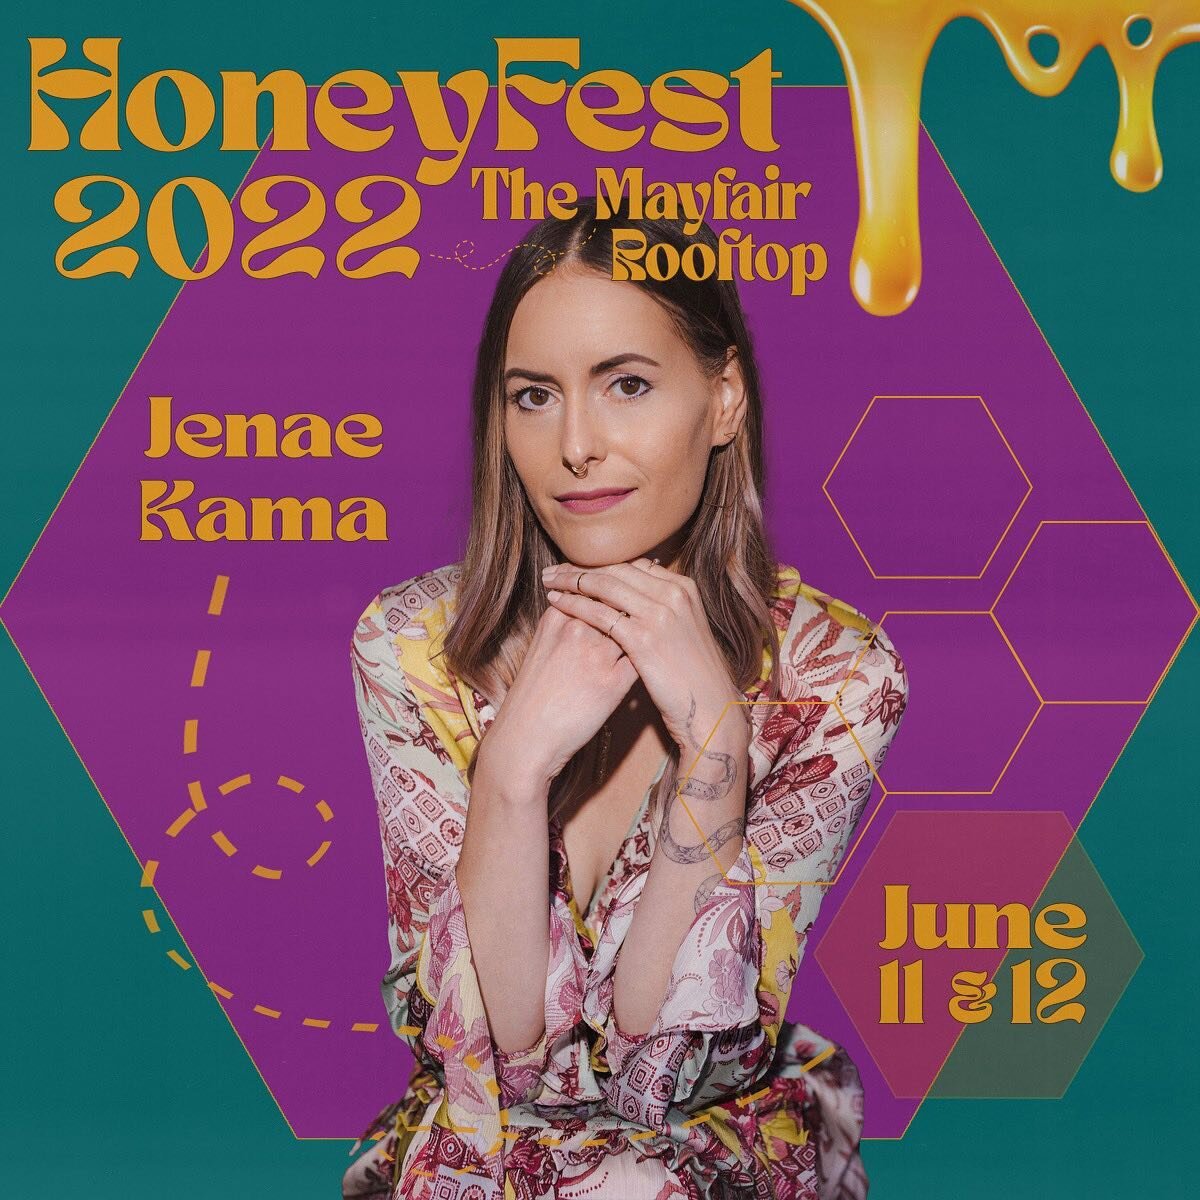 Hi everyone, I&rsquo;ve been radio silent for quite some time, and enjoying not participating in social media.  I may come back soon, but wanted to let y&rsquo;all know that I&rsquo;m doing a workshop for HoneyFest, and I would love to see you there.